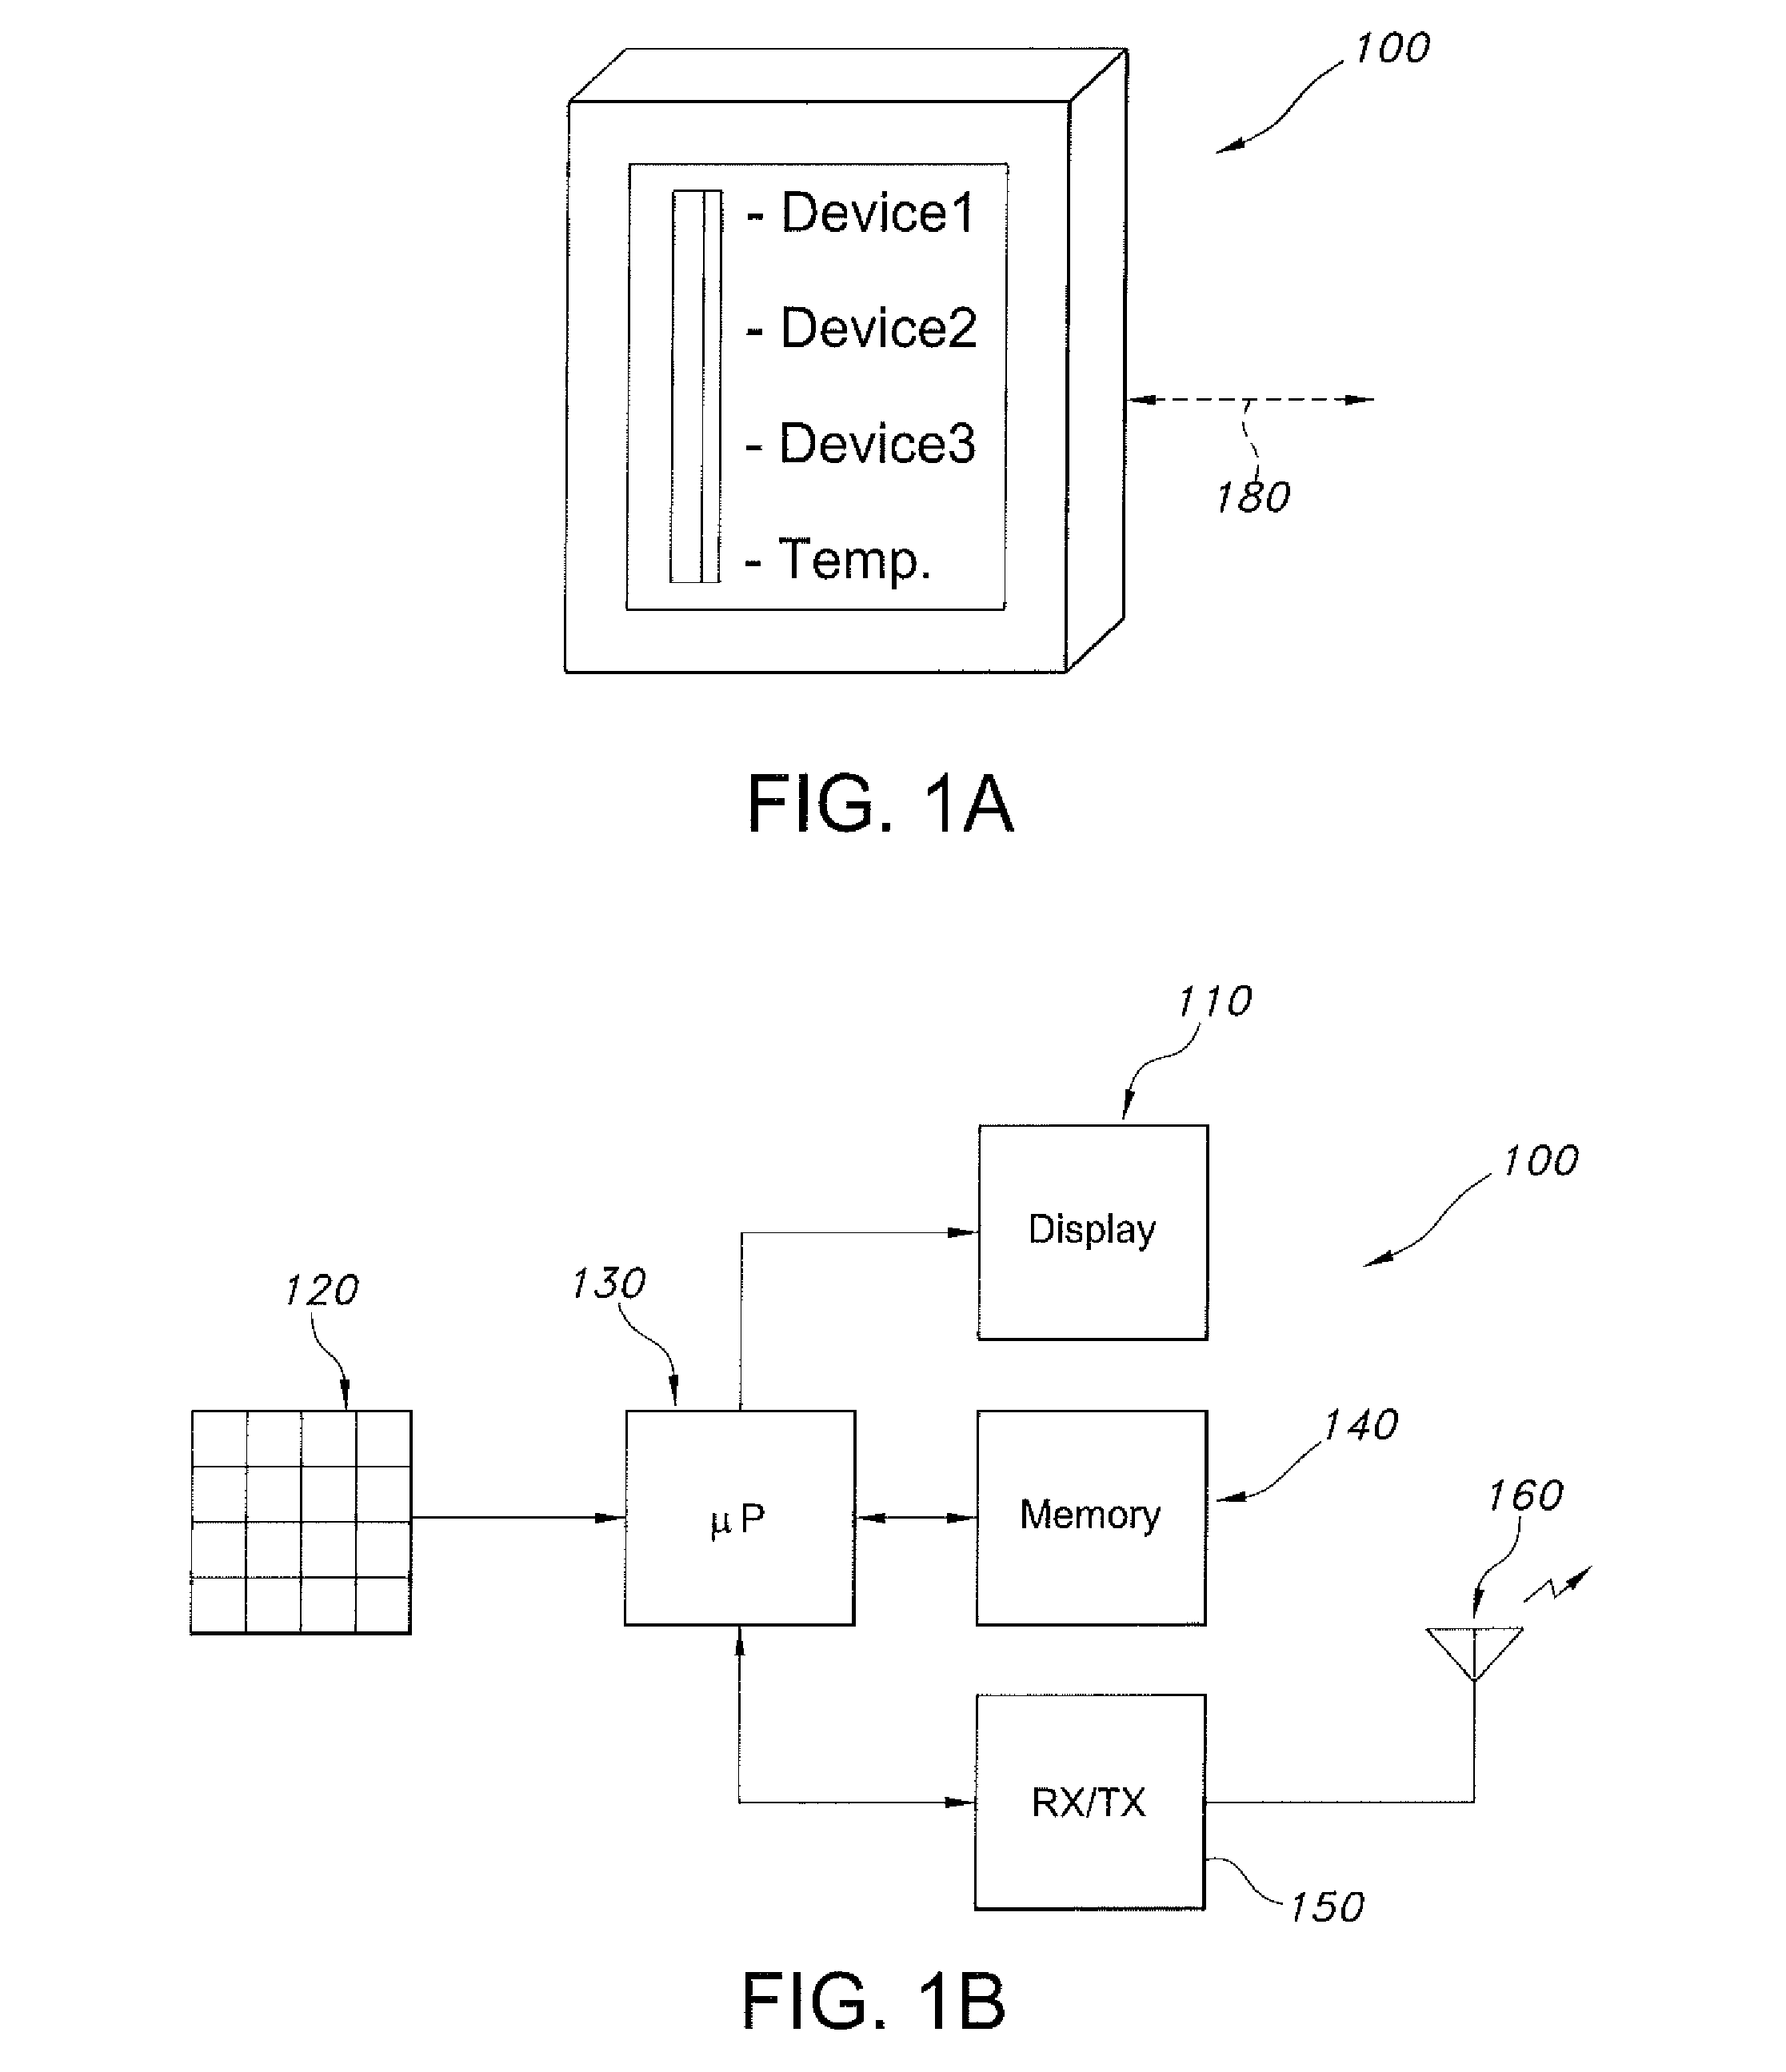 Electrical power distribution and control system and method for remotely controlling power delivery through IP addressable electrical power supply equipment and scanning a network for power control devices